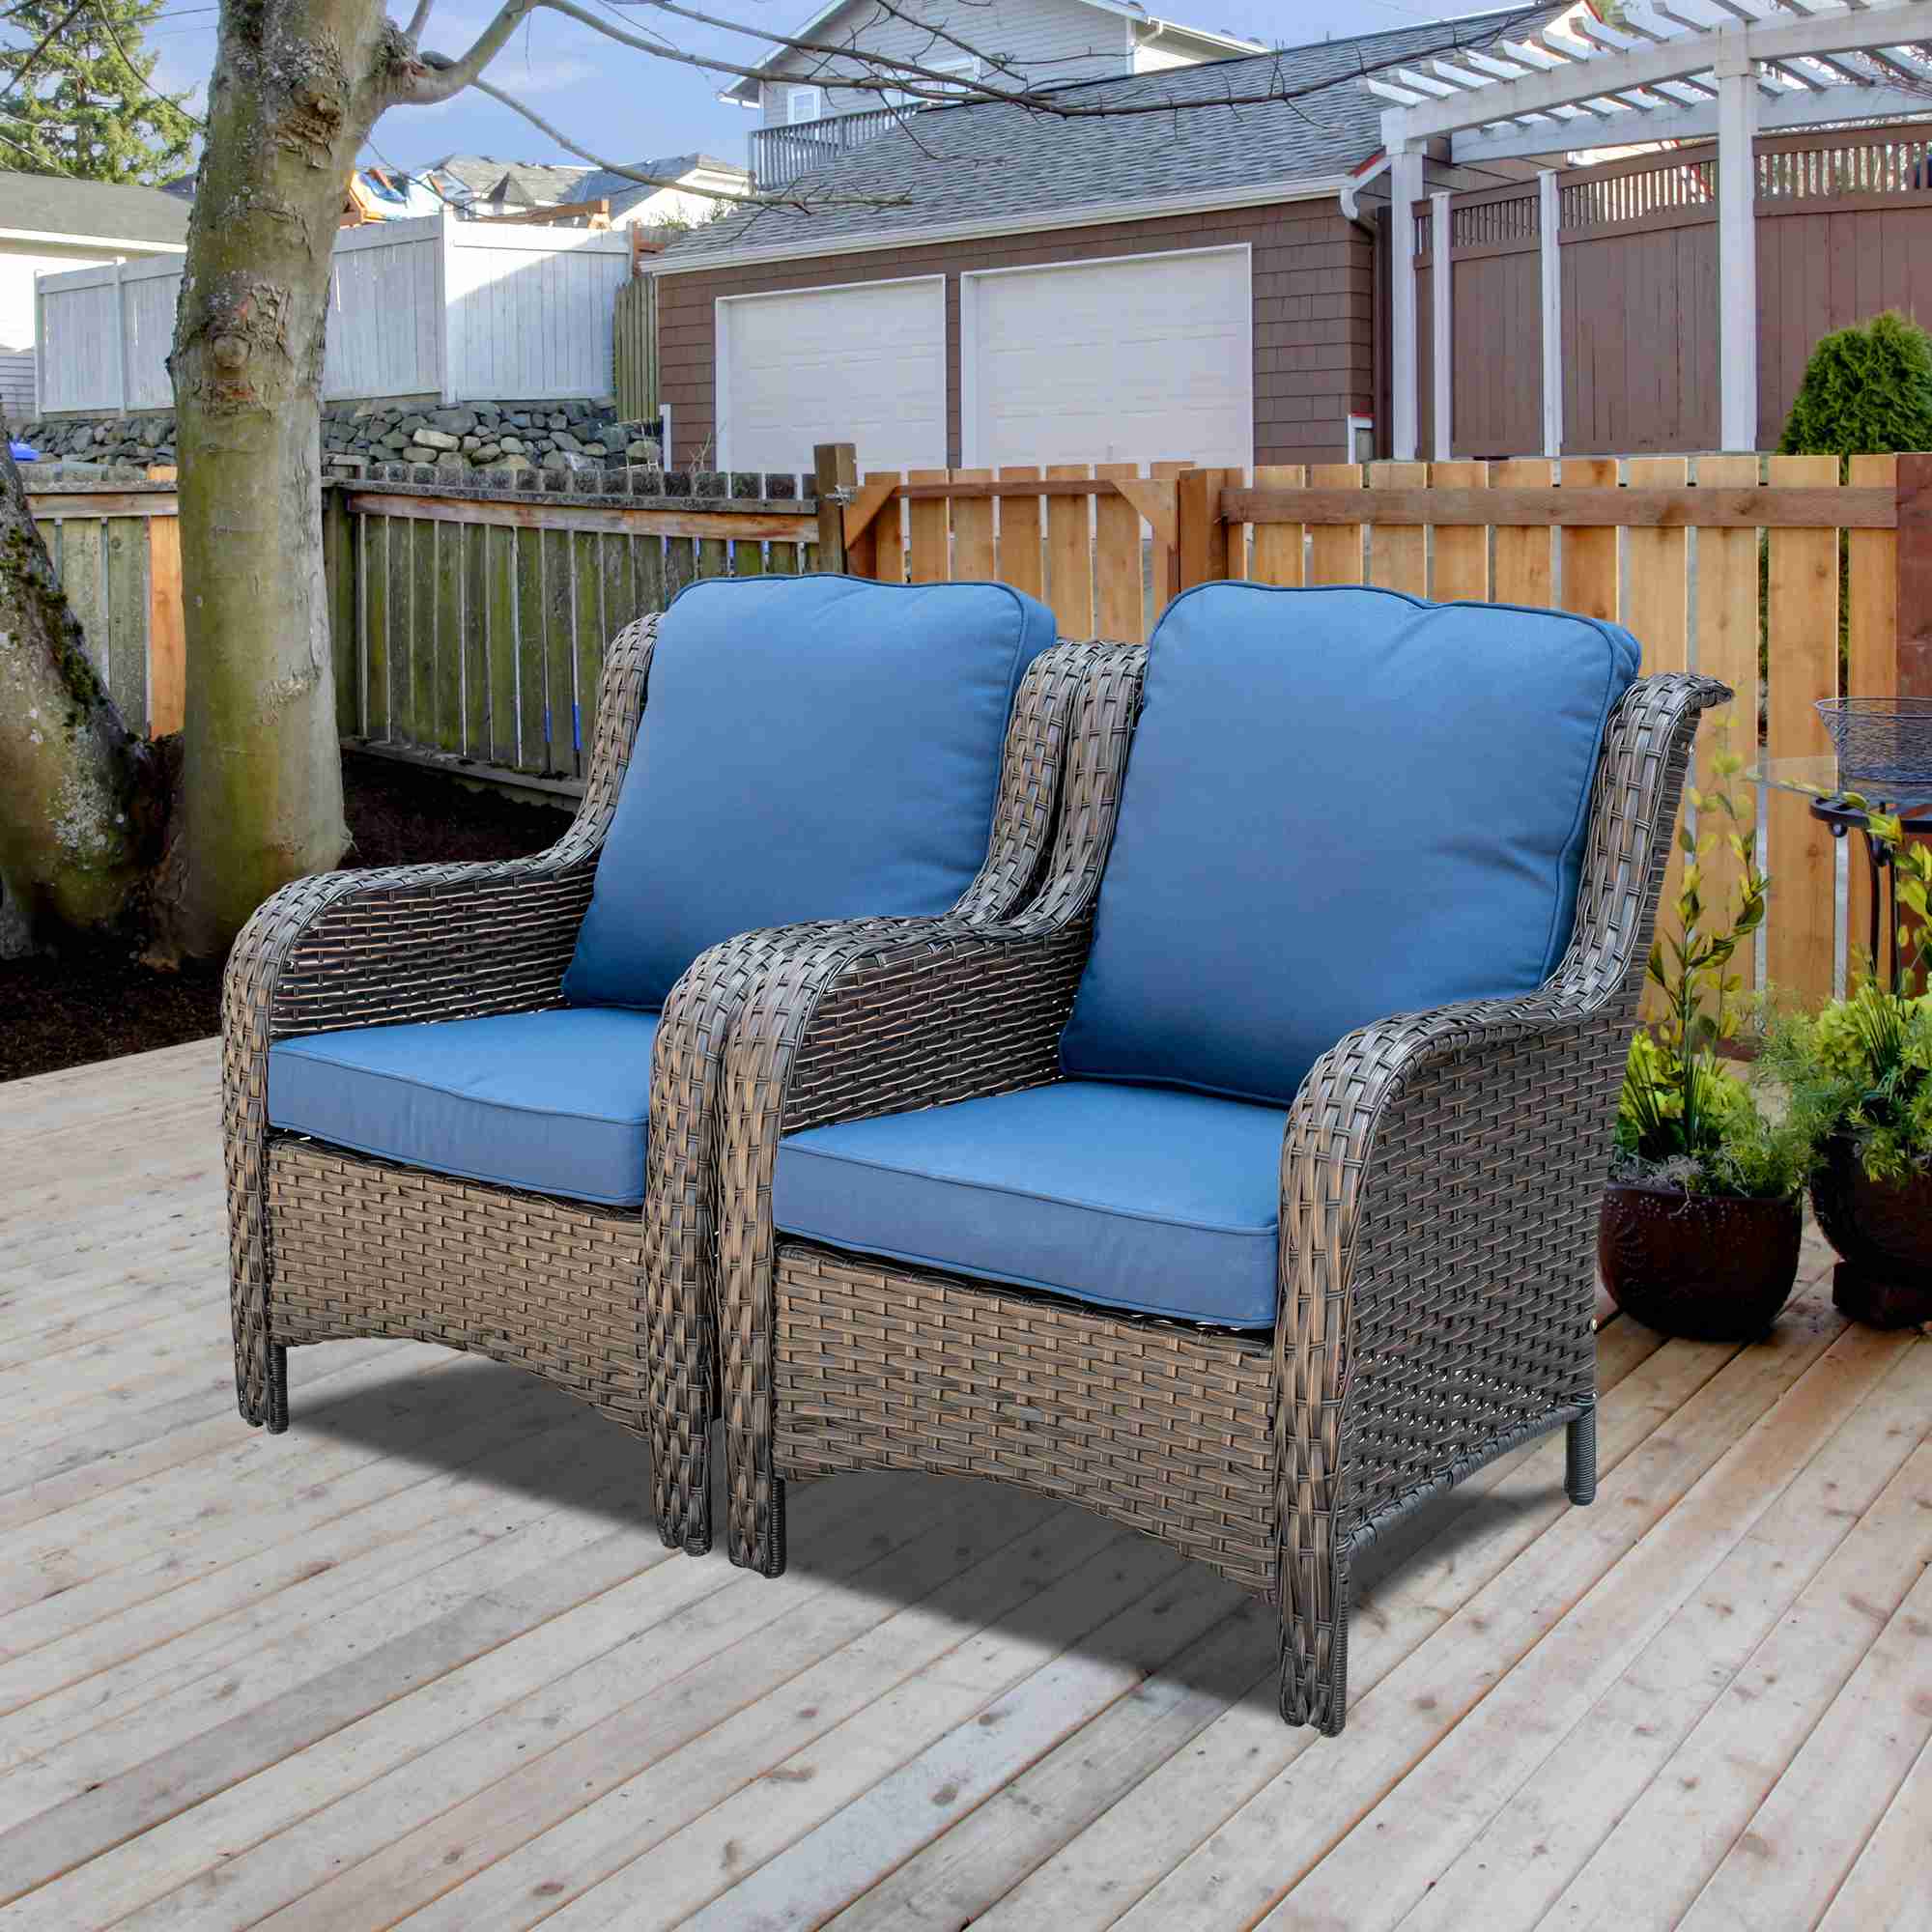 Corvus Sirio Multi-purpose Rectangle Velcro Cover for Outdoor Furniture -  Bed Bath & Beyond - 34492025